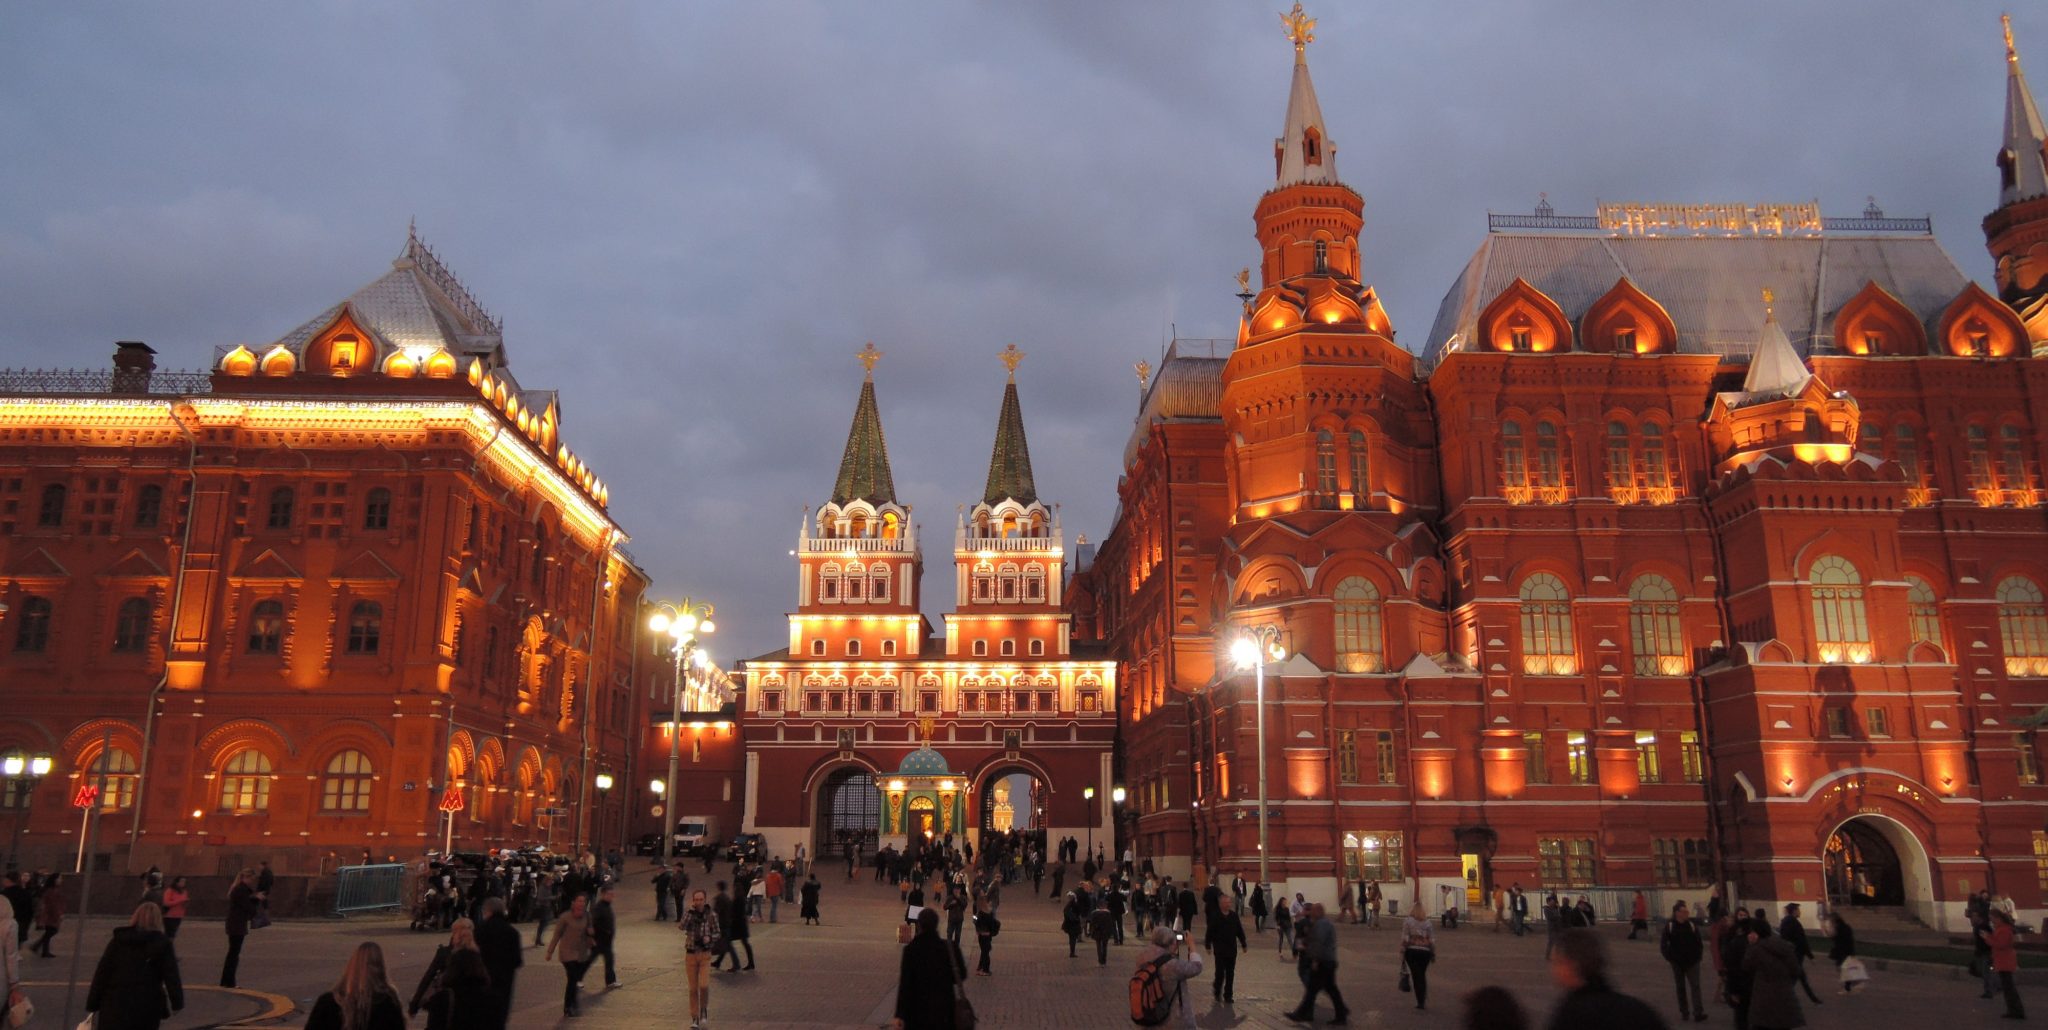 How to Get Temporary Residency Permit in Russia